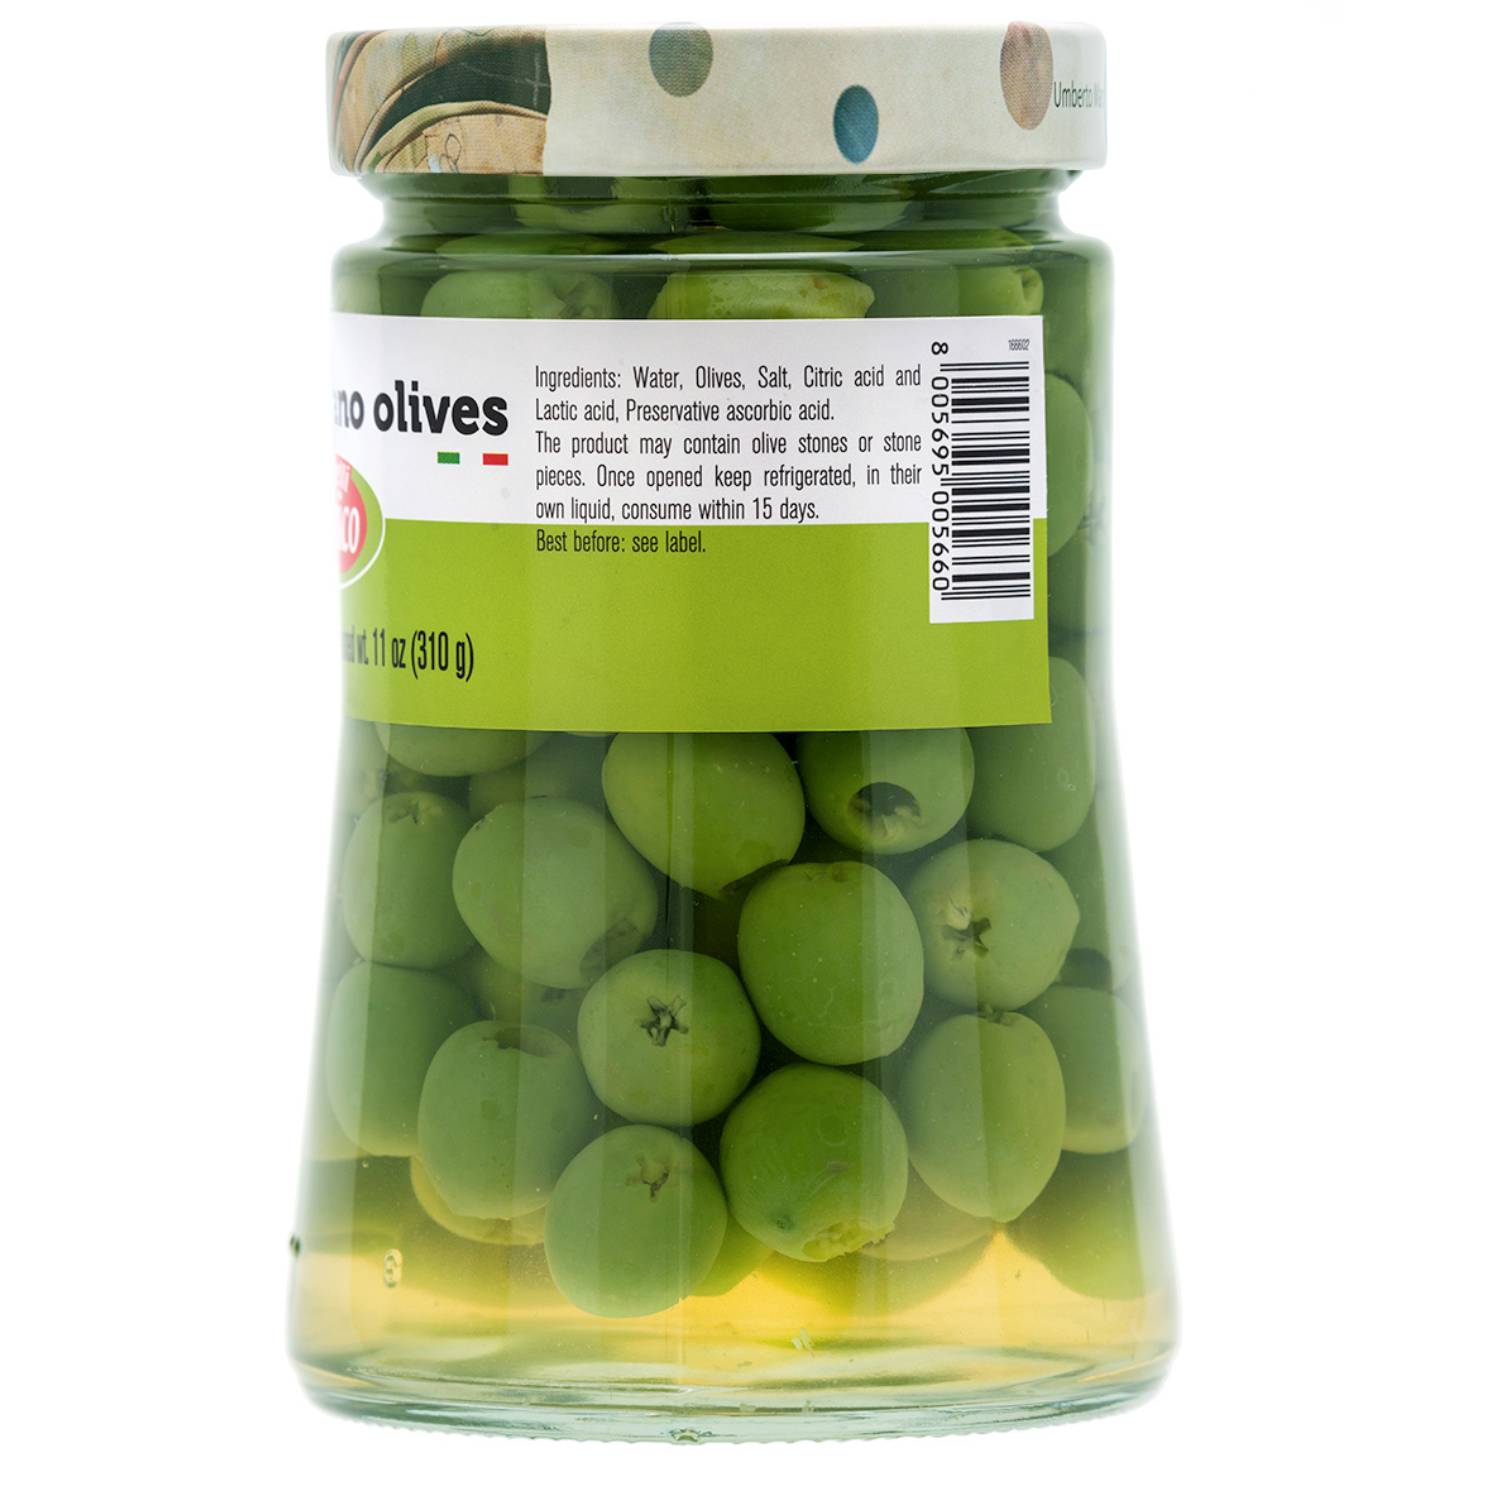 Fratelli D'Amico, Castelvetrano Olives, Pitted, Sicilian Green Olives, Olive Pitted, 24 oz (700g)